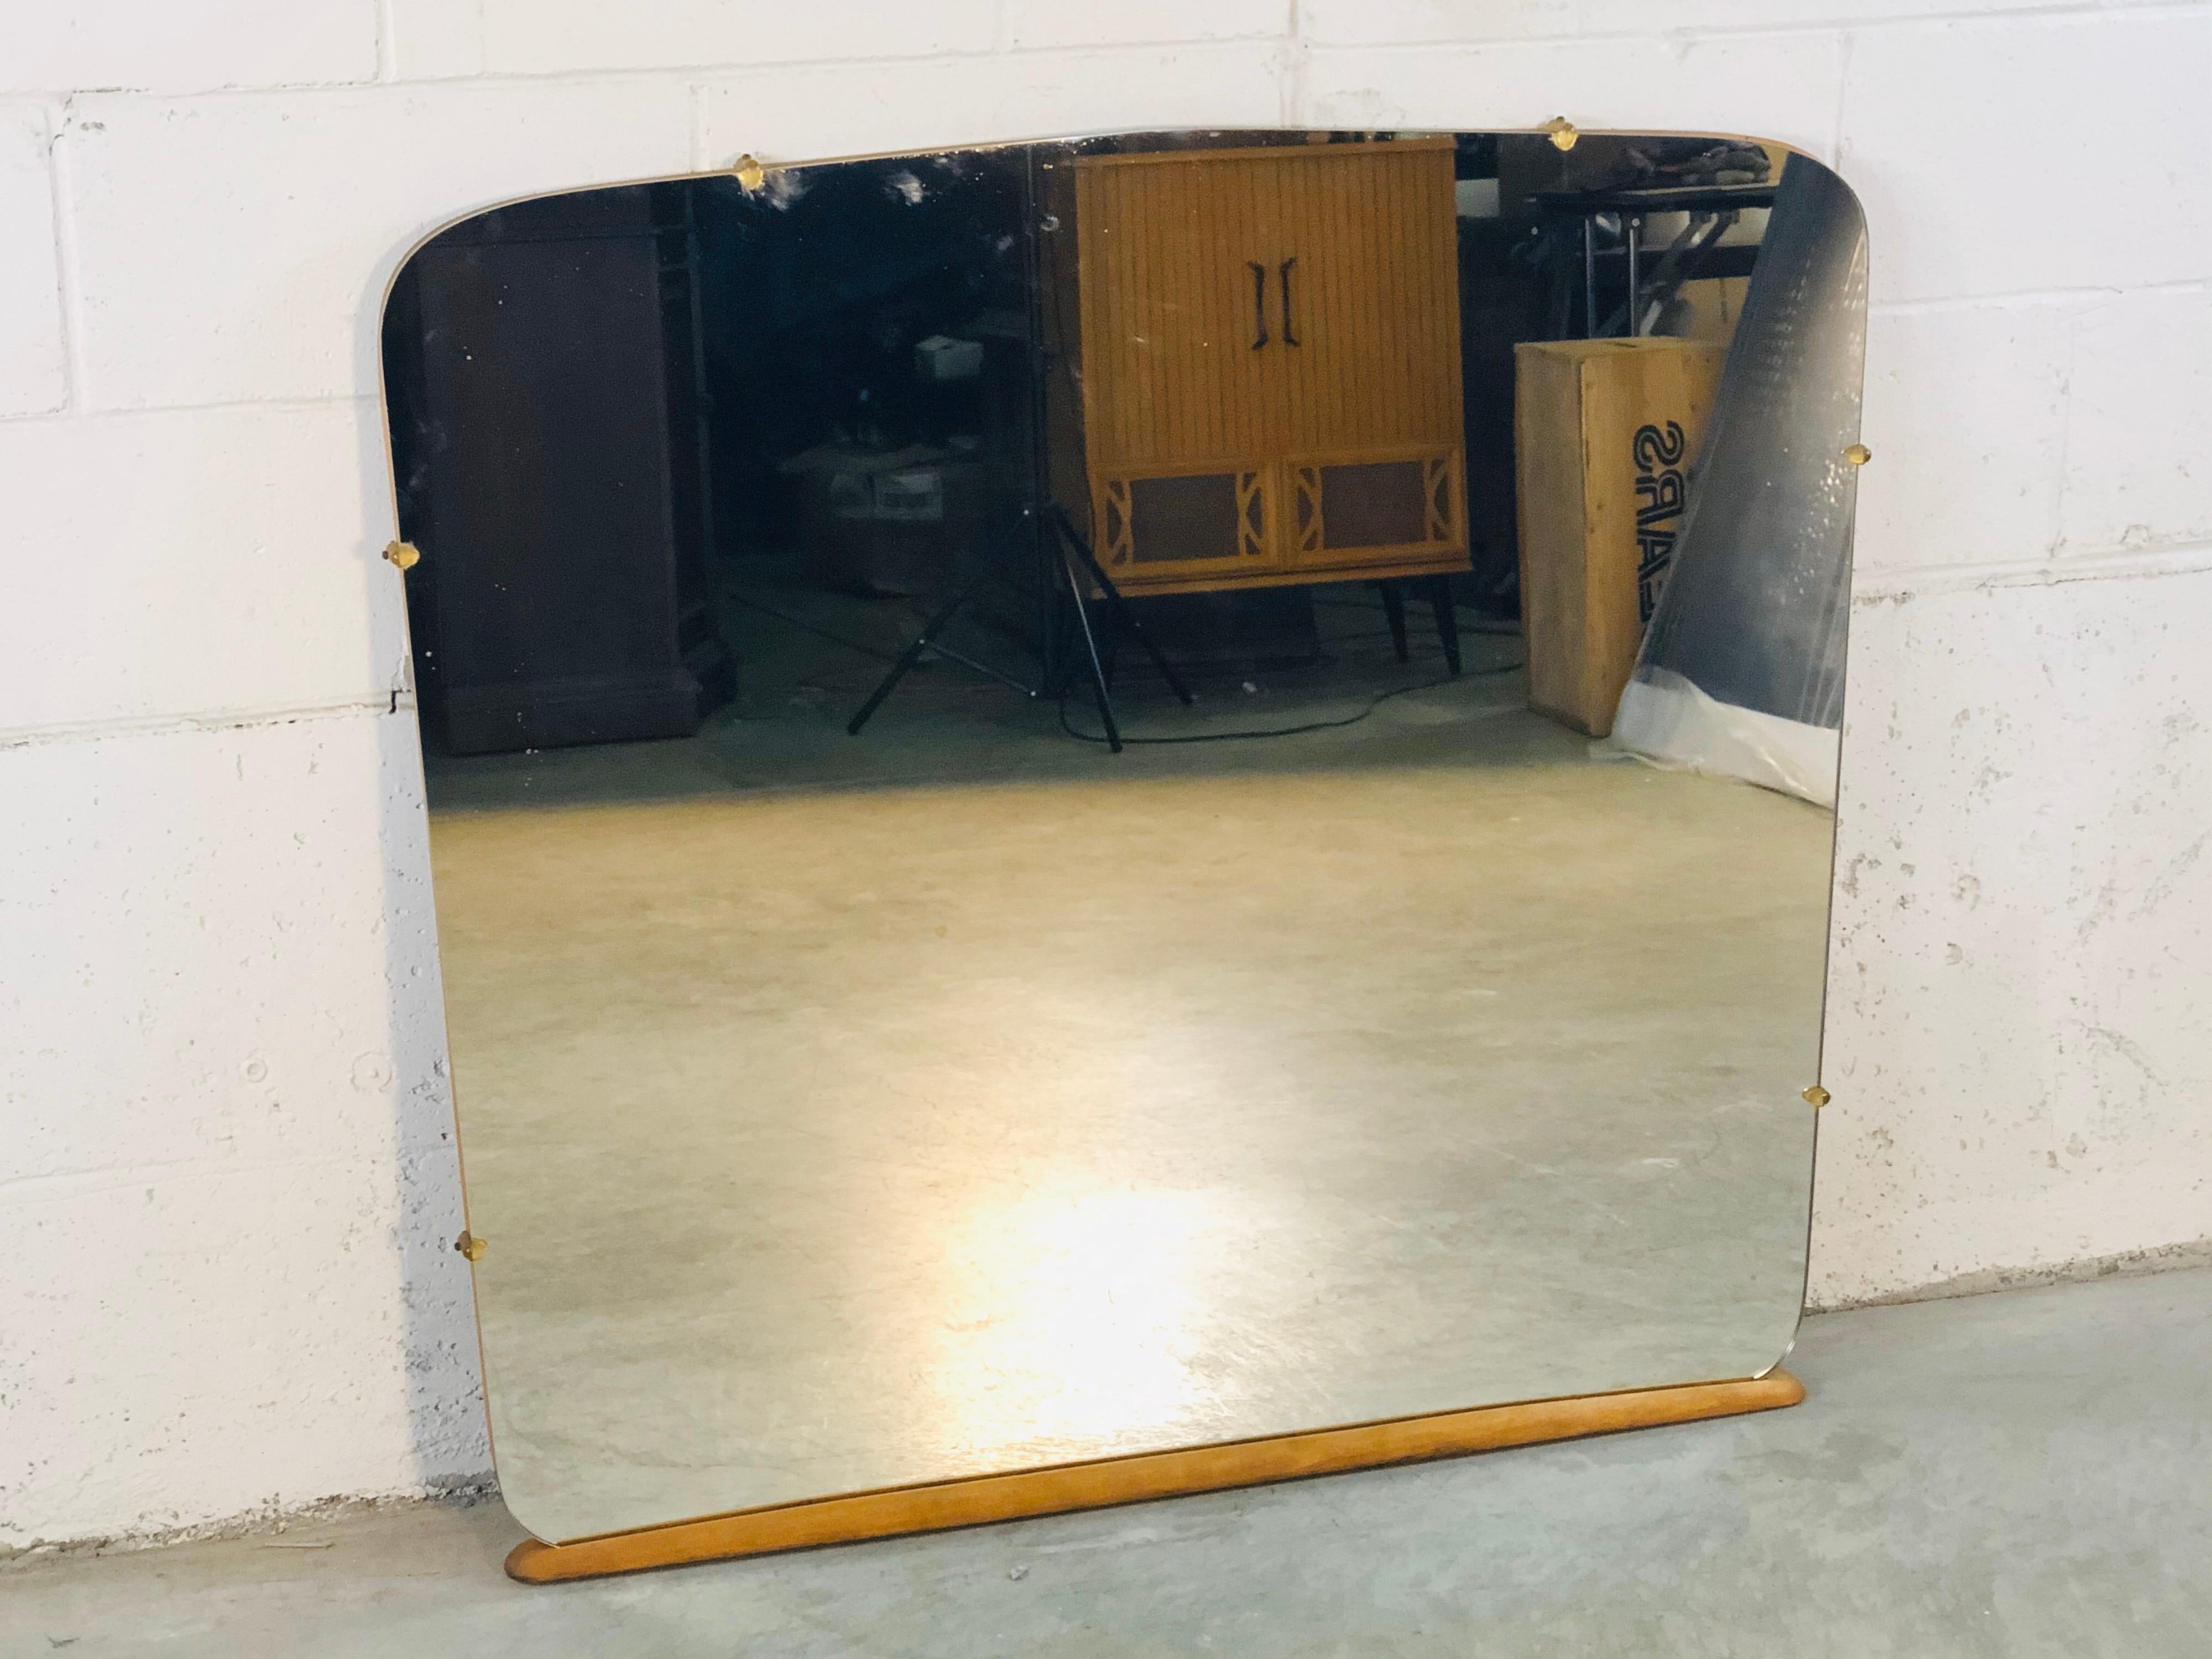 Vintage 1950s Heywood Wakefield mirror. May have originally been used on a vanity but could easily be used as a wall mirror today. The wood has been restored and the mirror is in excellent condition. No hardware. Marked on the back.